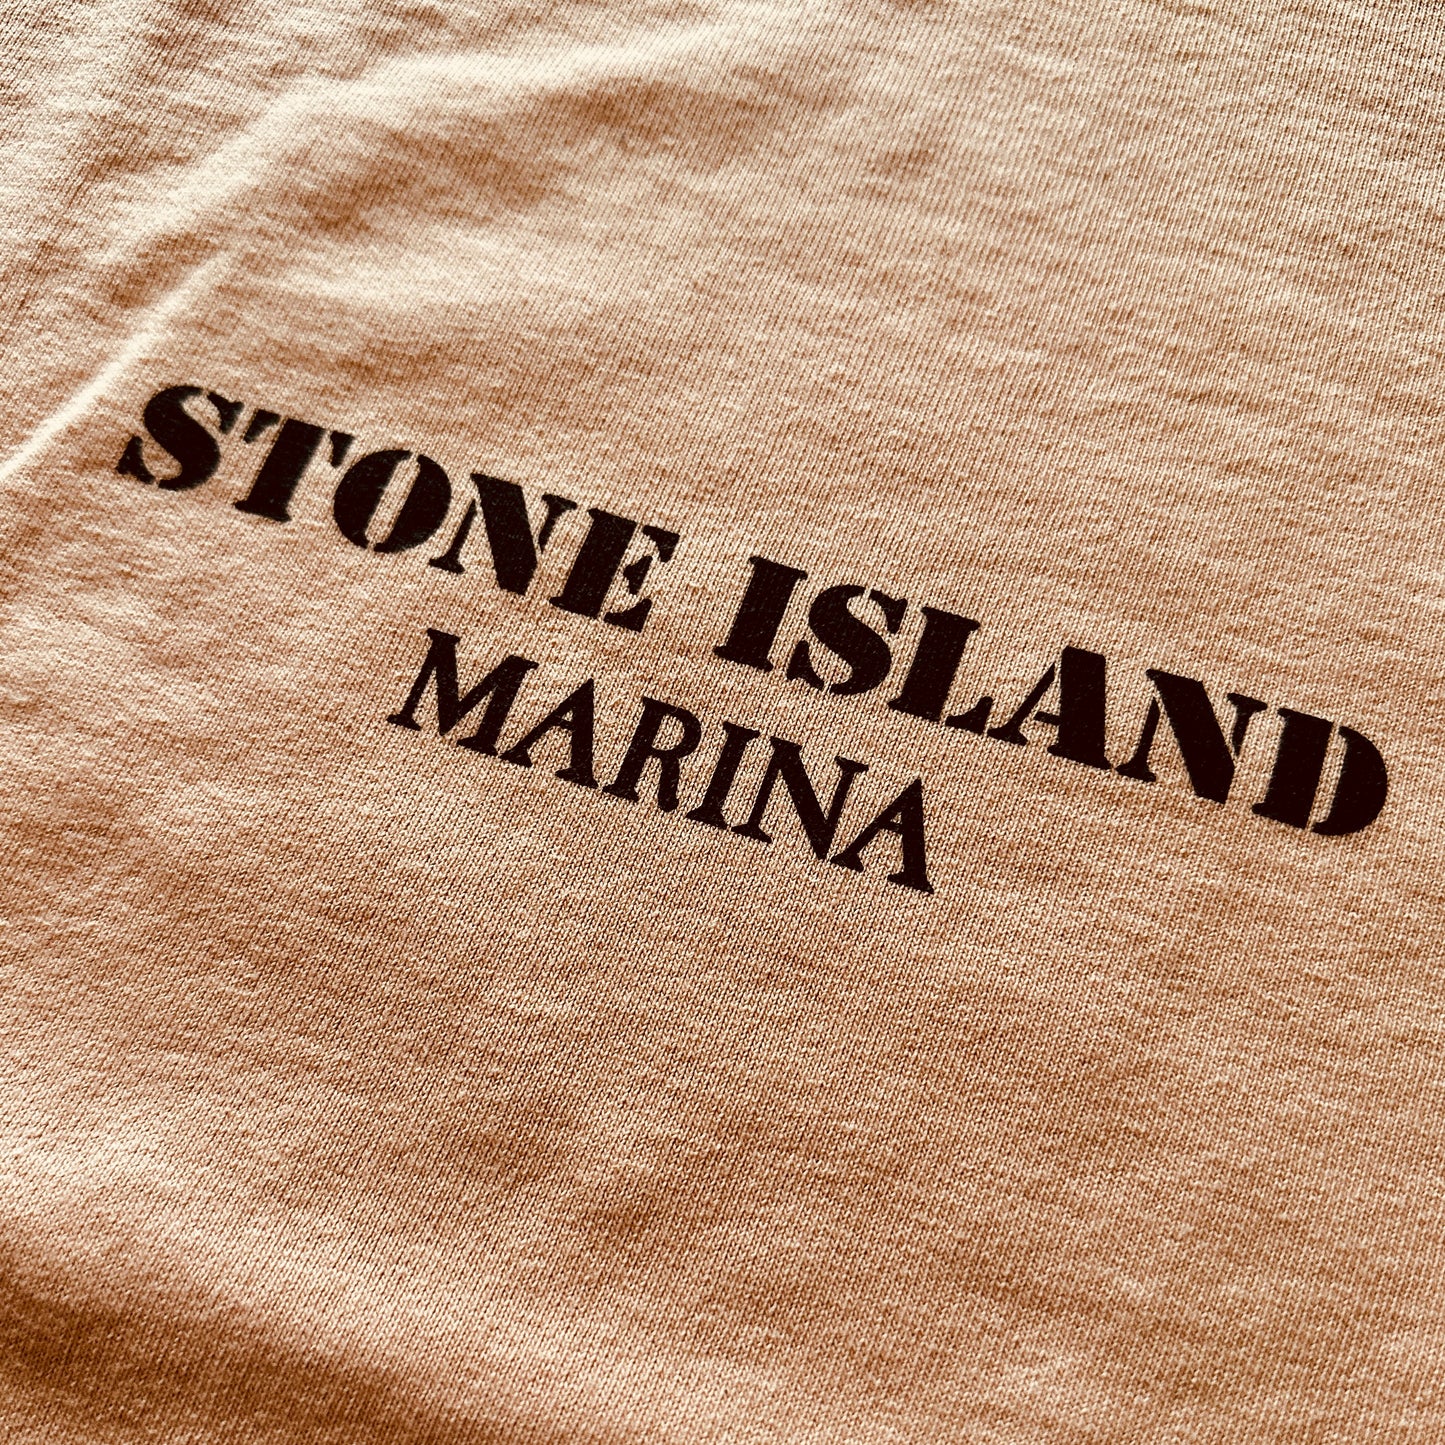 Stone Island Marina 40 Anni Kit Special Edition T-Shirt  - XXL - Made in Italy